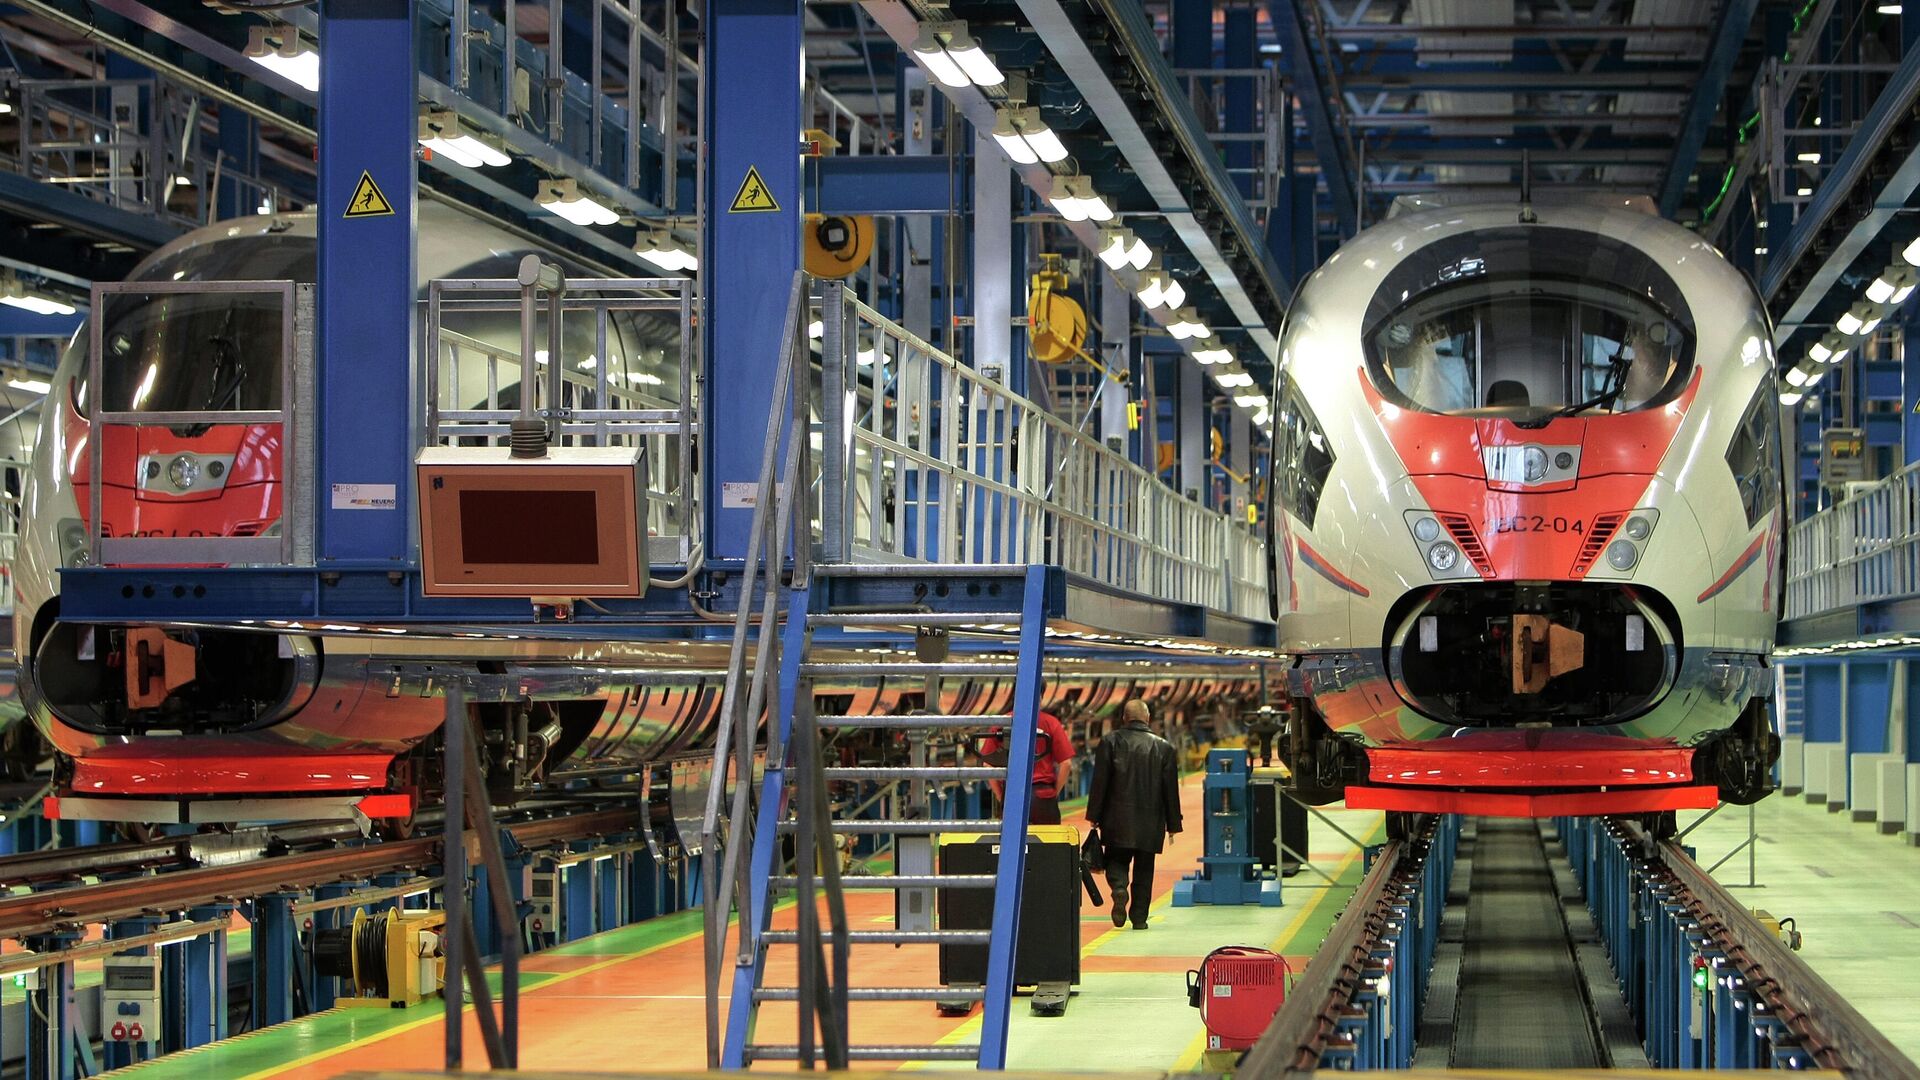 Russian Railways announced that there were no problems in providing service to Sapsan.